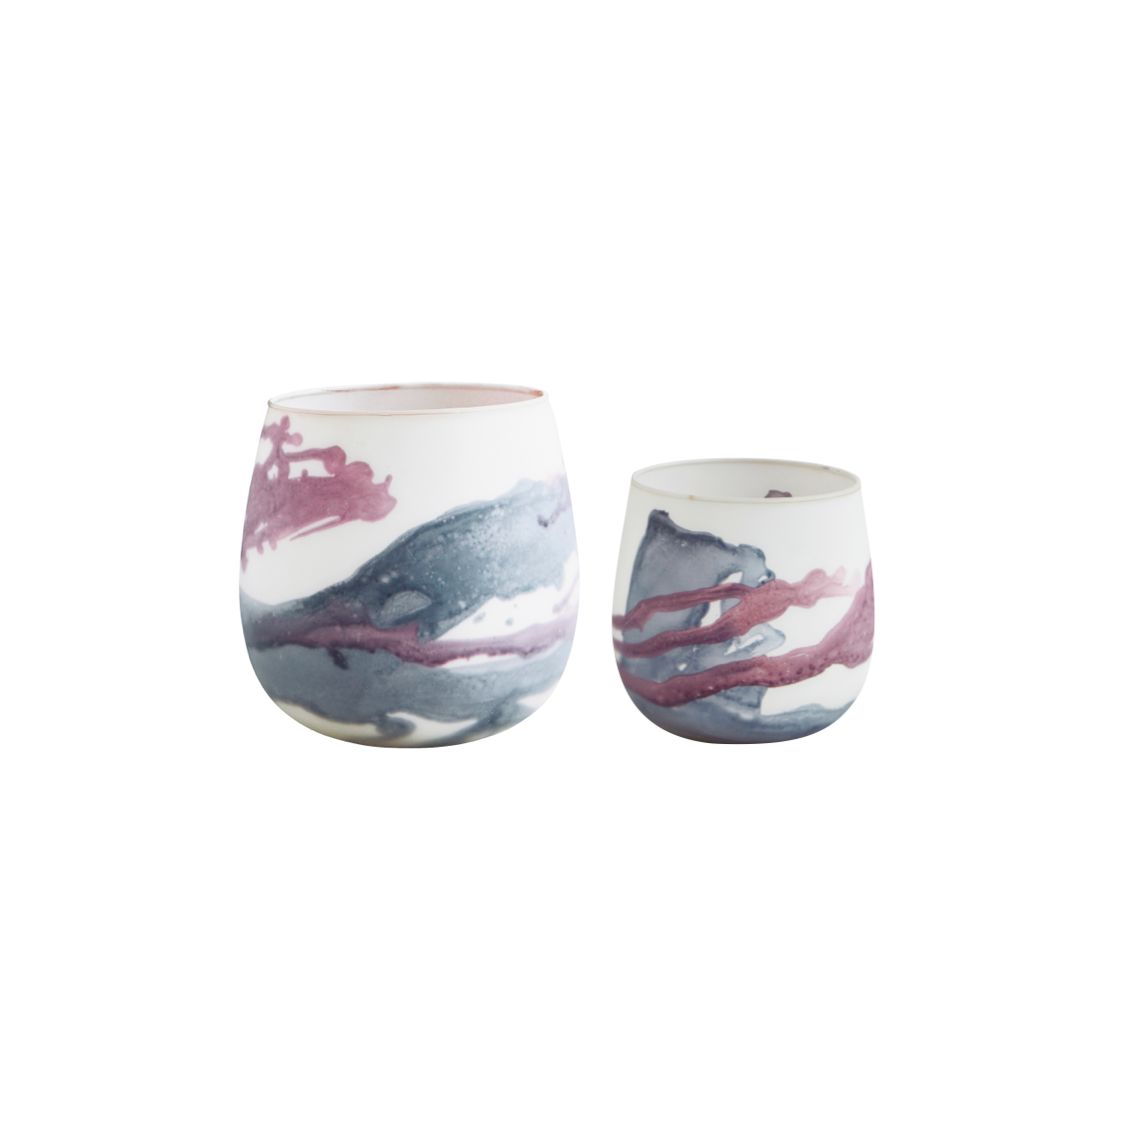 Set of two glass votives, one larger than the other, with a base colour of off white and paint splatters in grey and purple